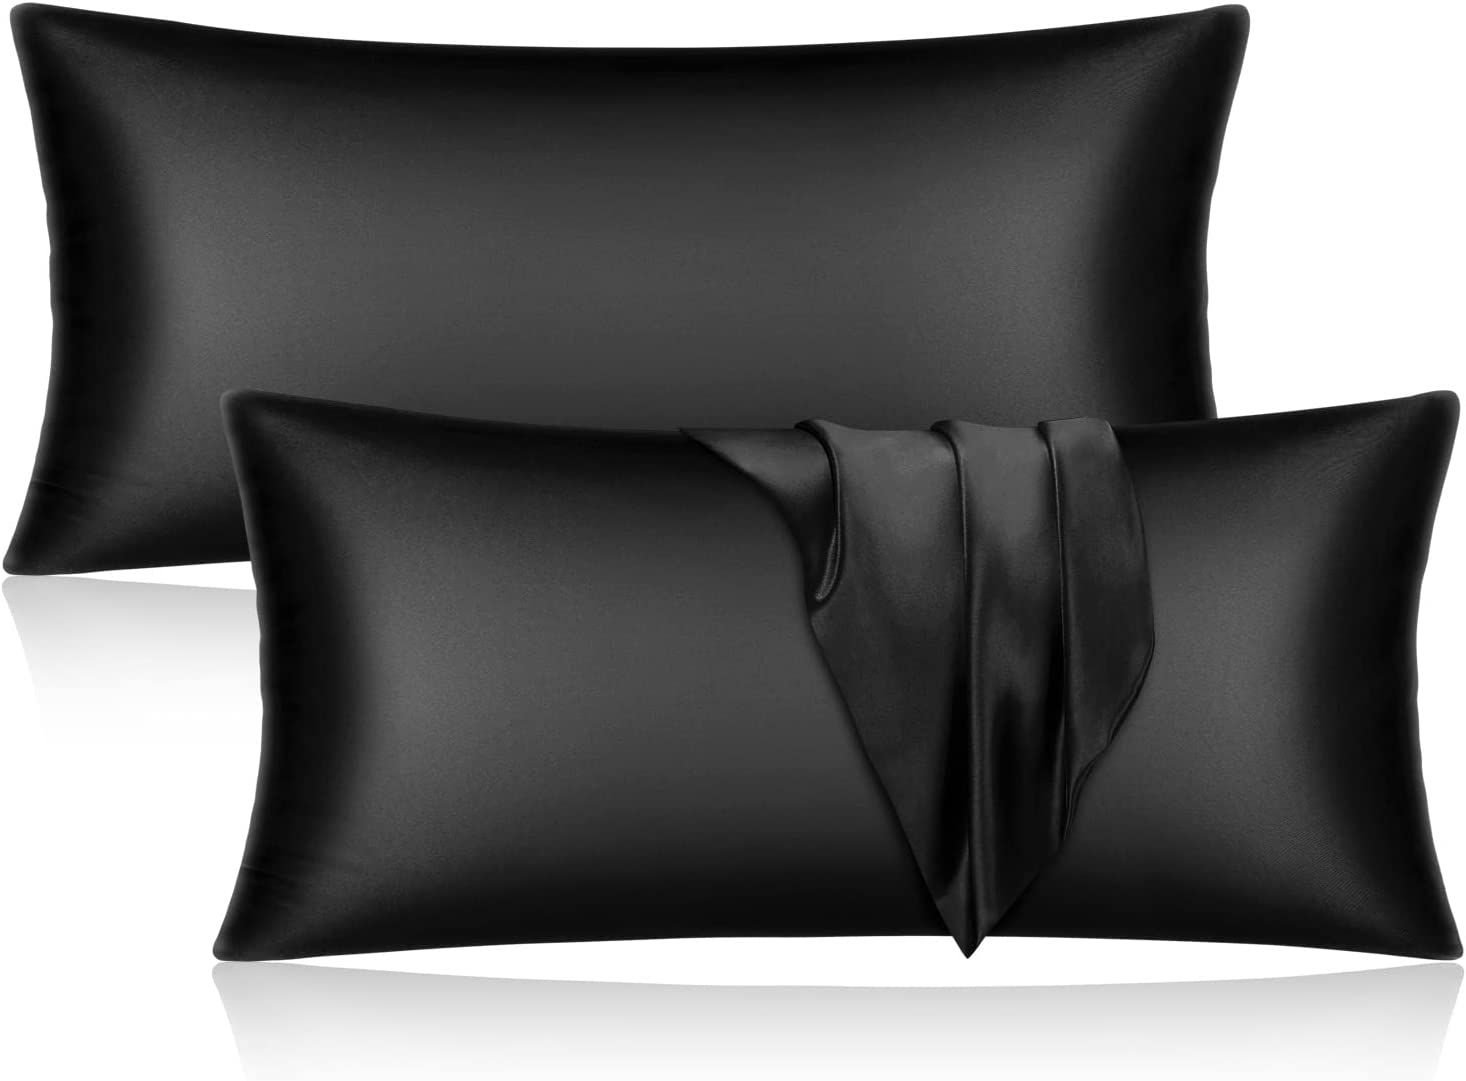 Satin Pillowcase for Hair and Skin,Standard Size Pillowcase Set of 2 with Envelope Closure,Soft Silky Pillow Cases 2 Pack(20X26 Inches,White)